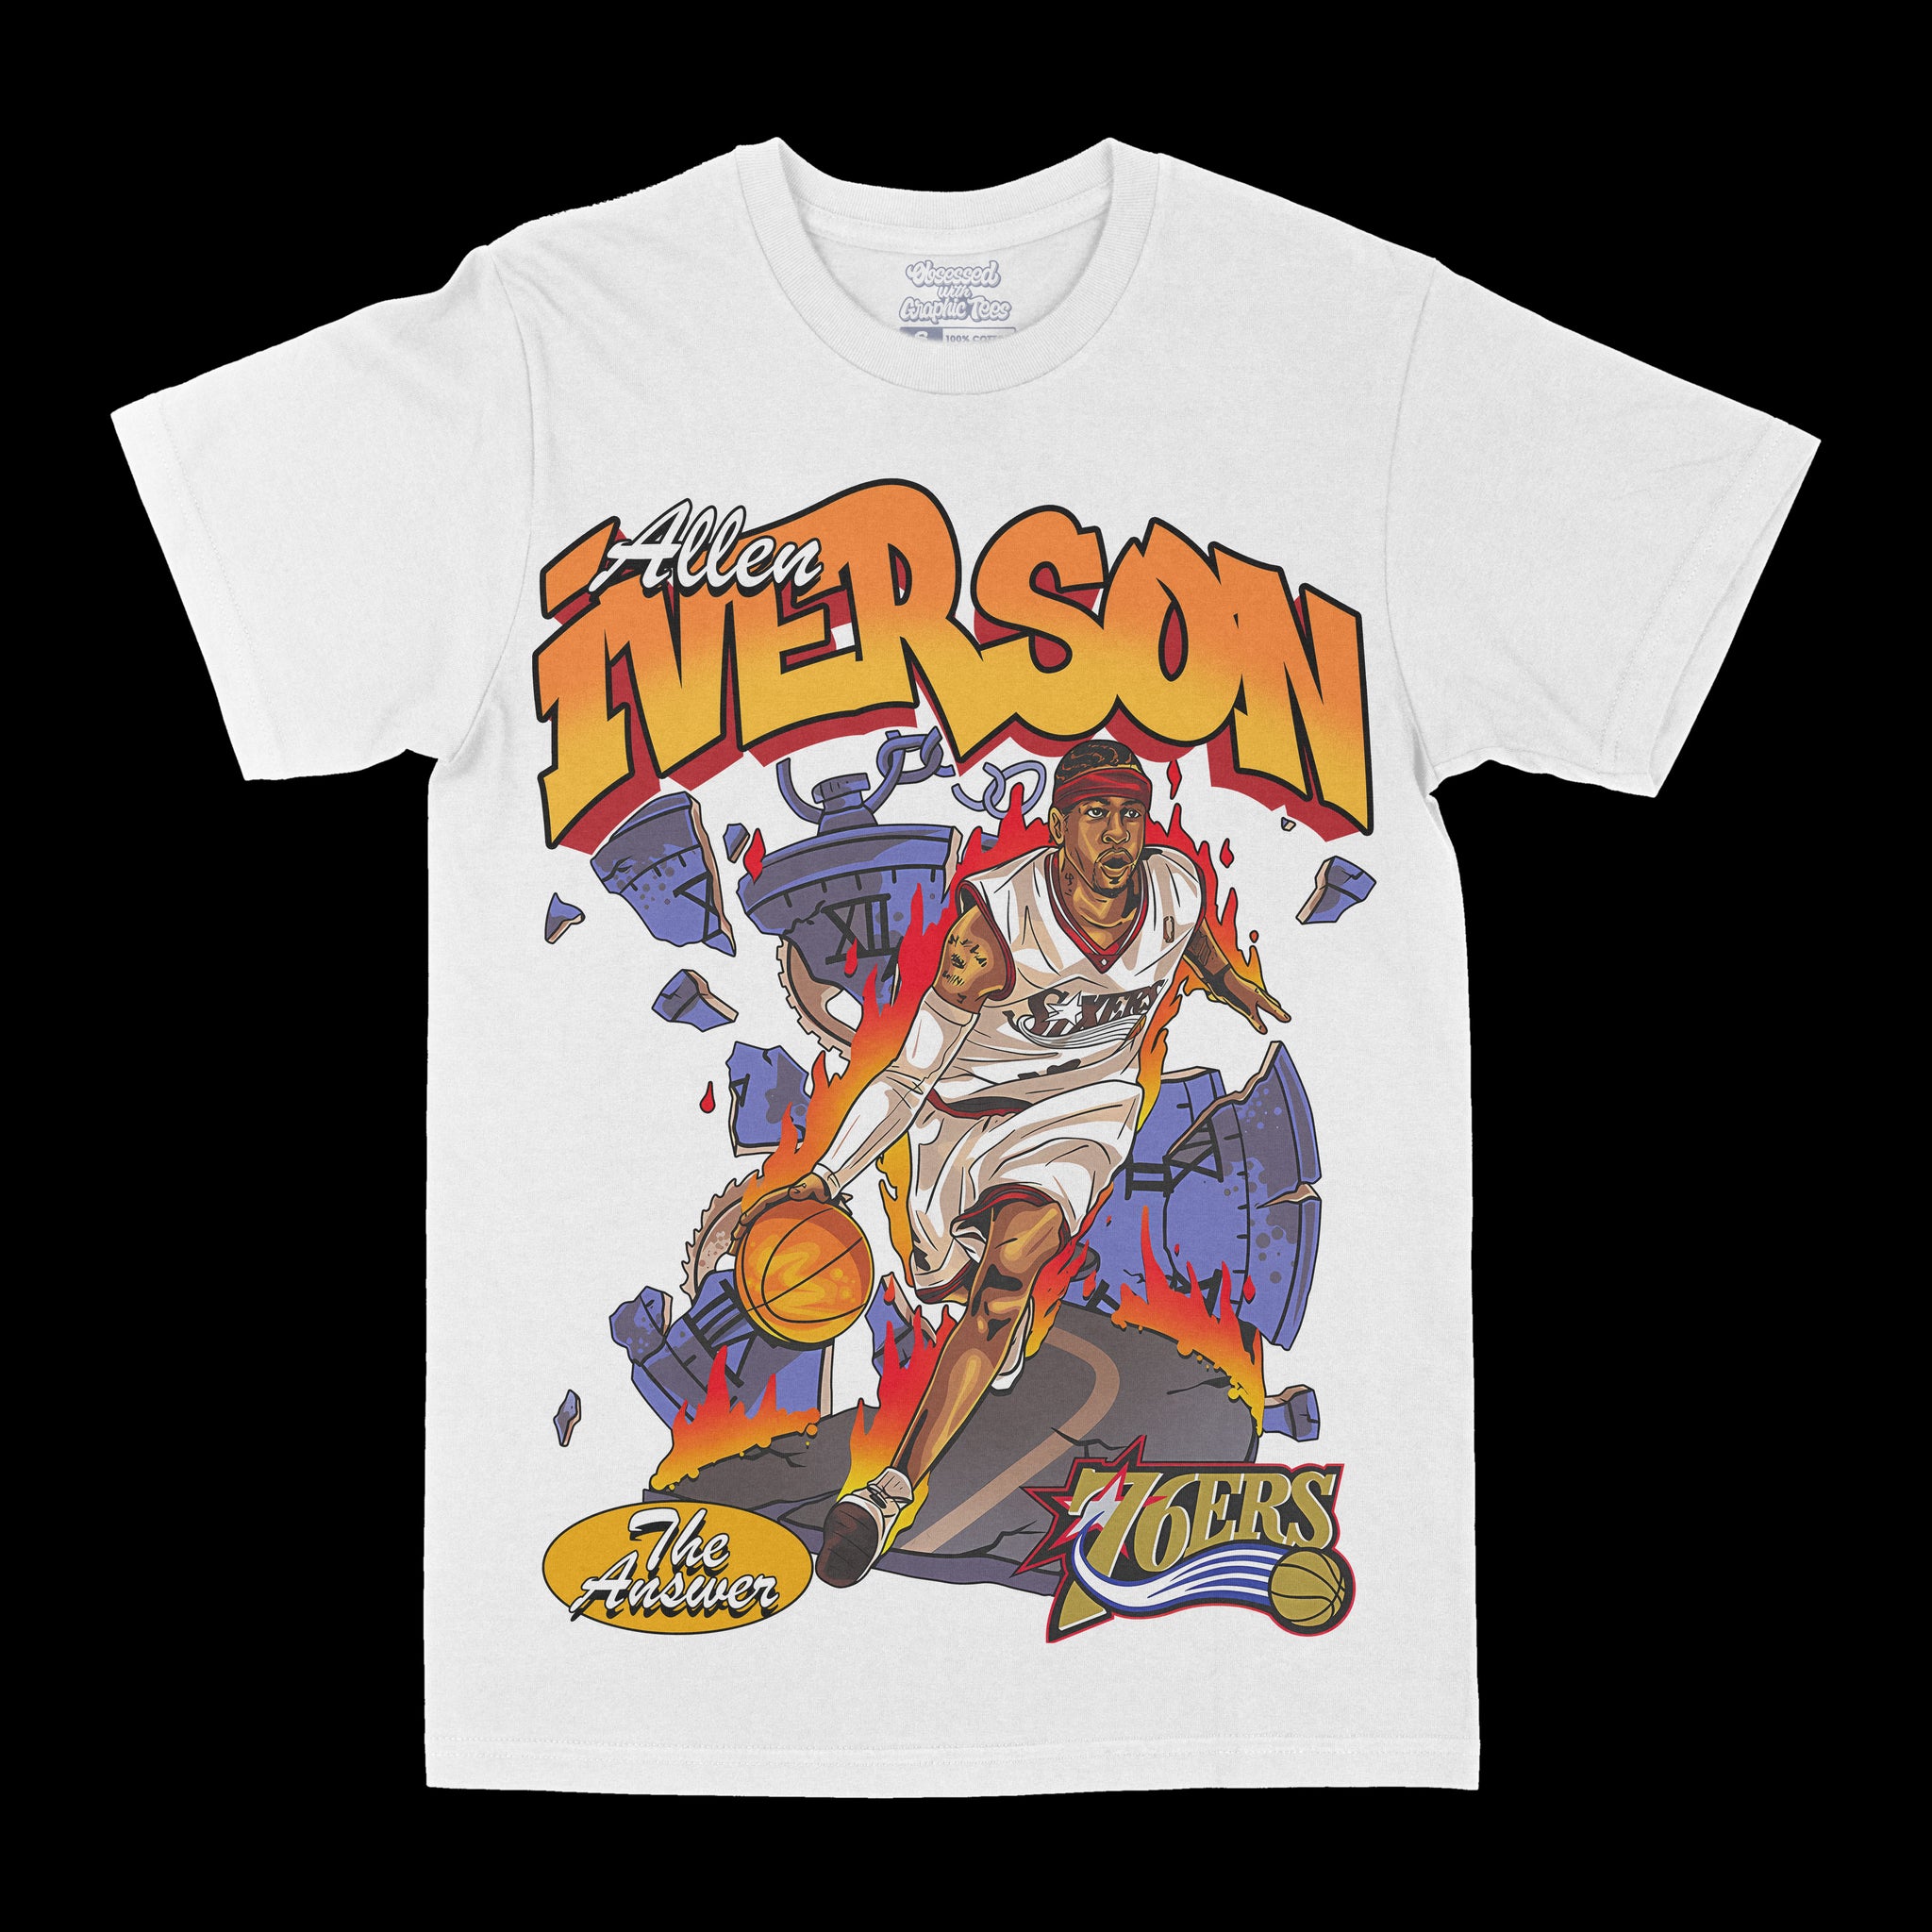 Allen Iverson "The Answer" Graphic Tee